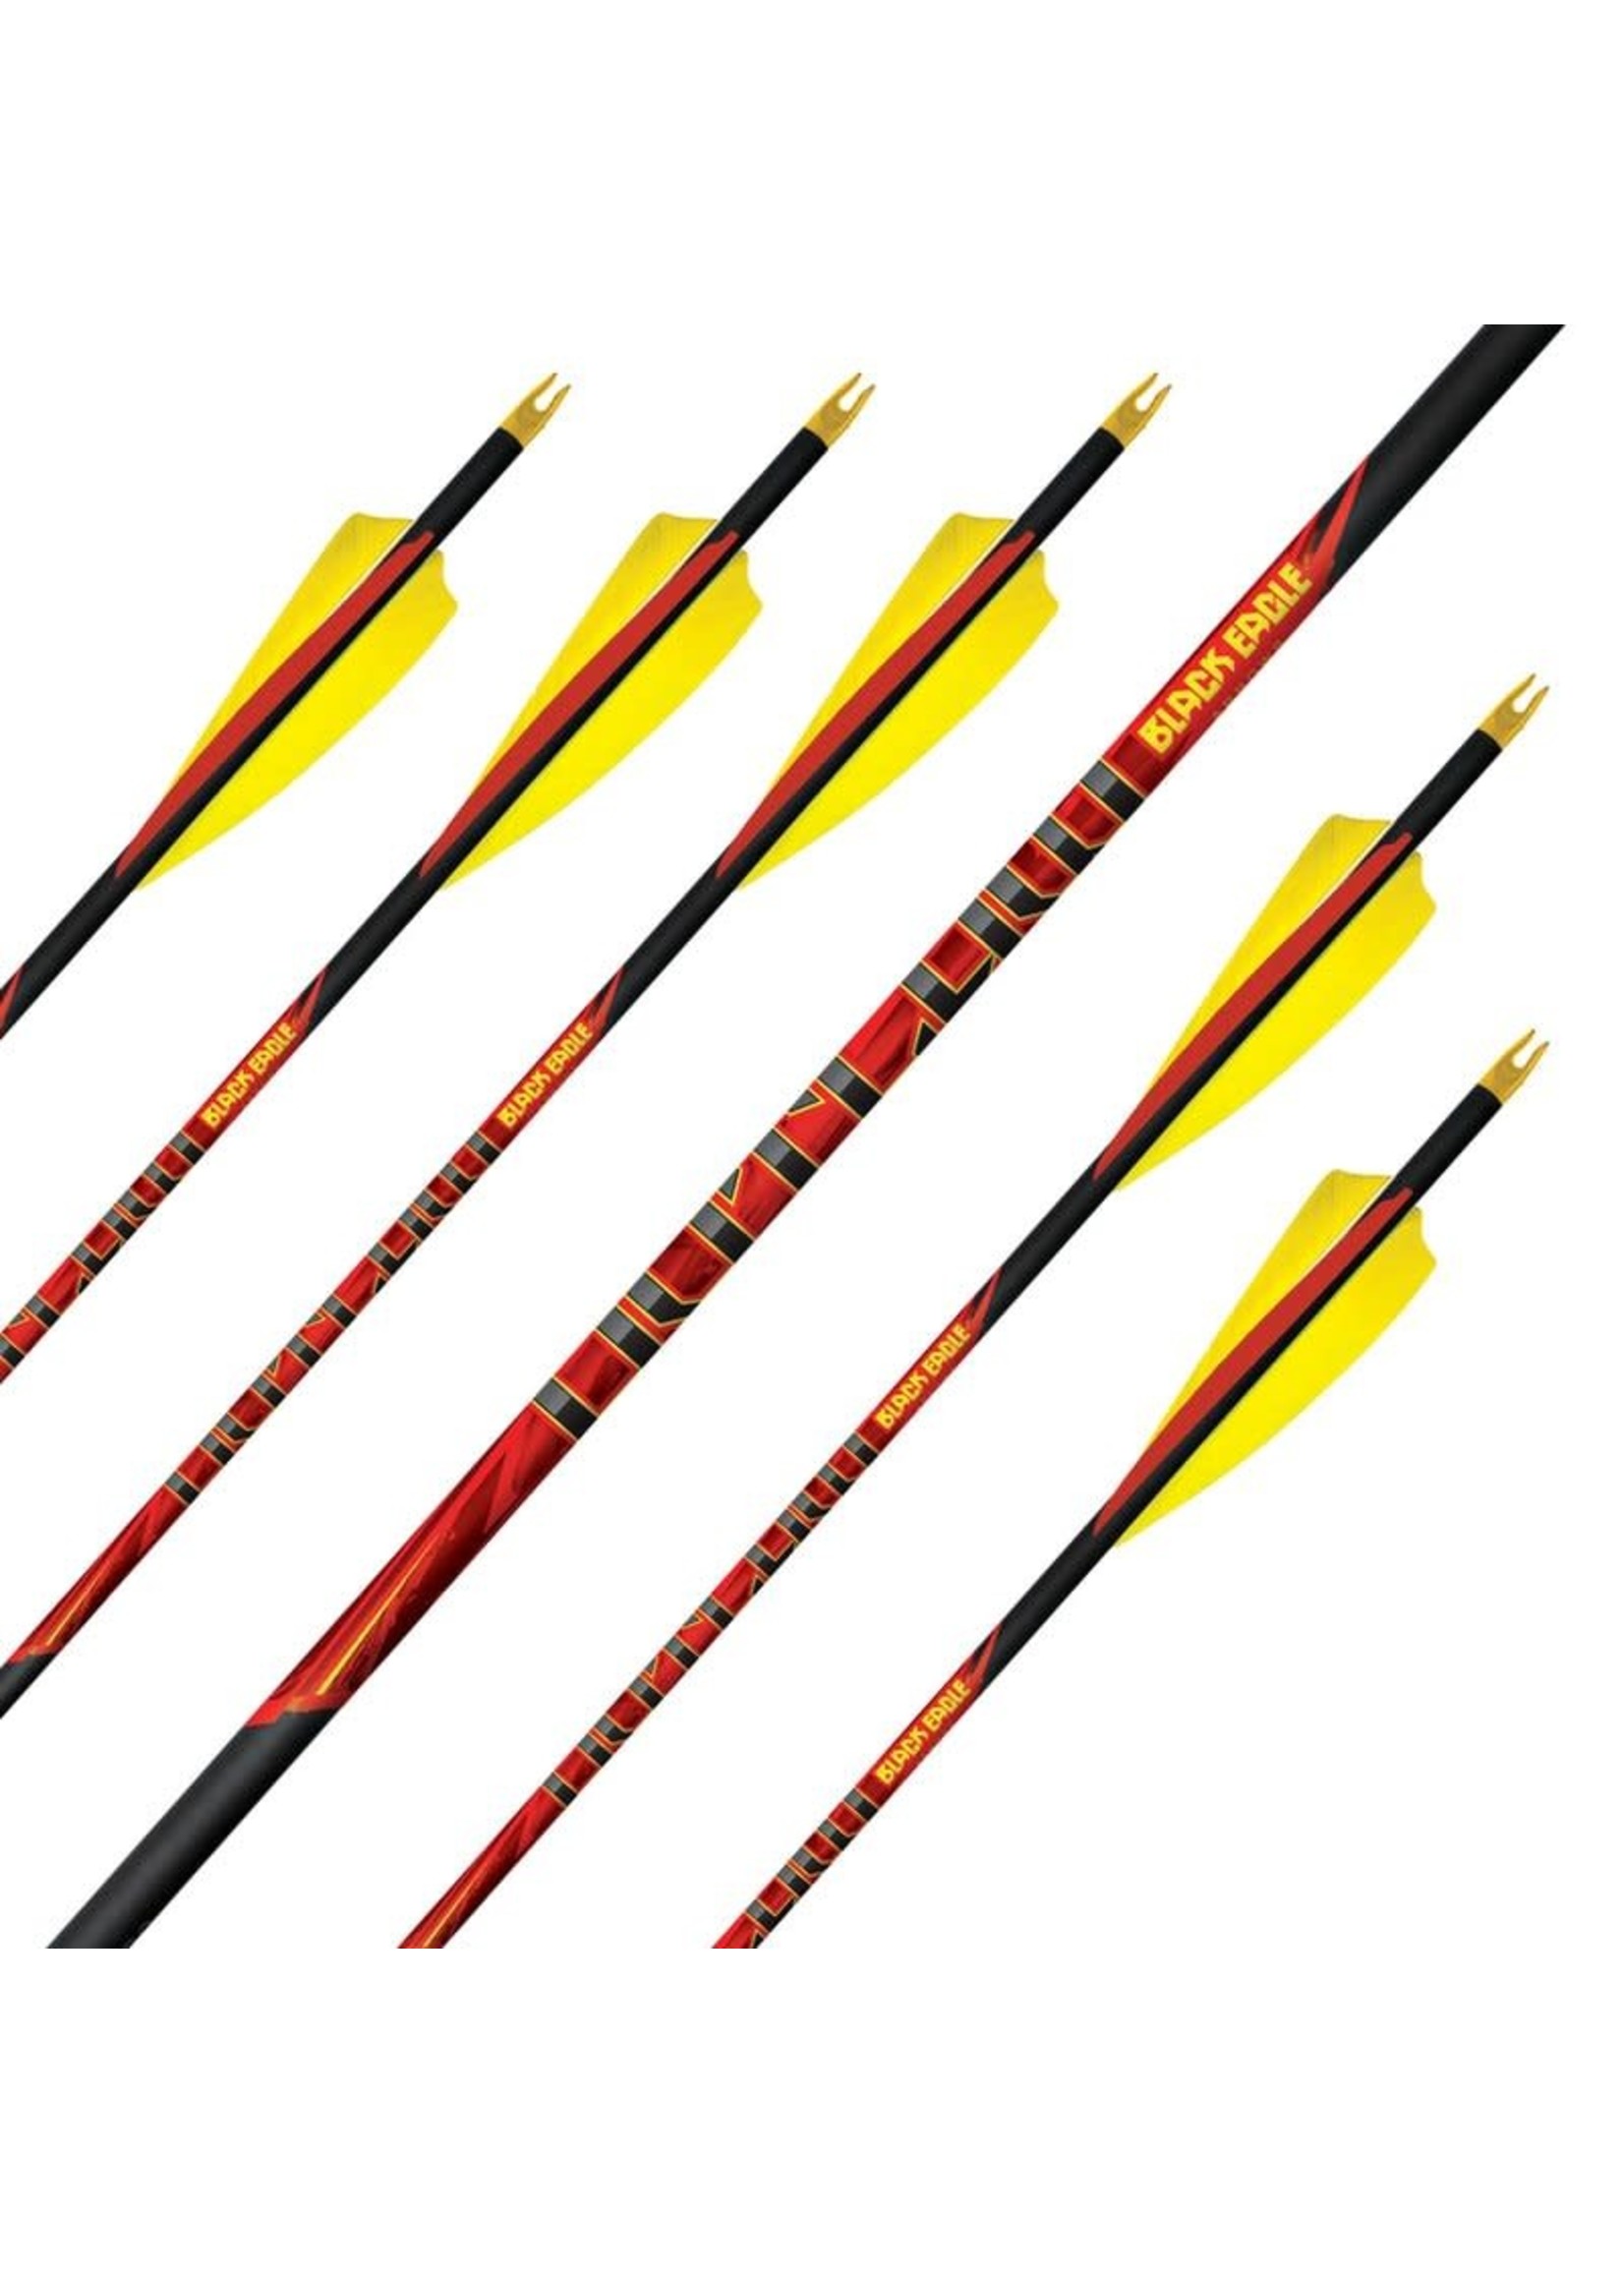 Black Eagle Arrows Outlaw feather fletched - 6 pack